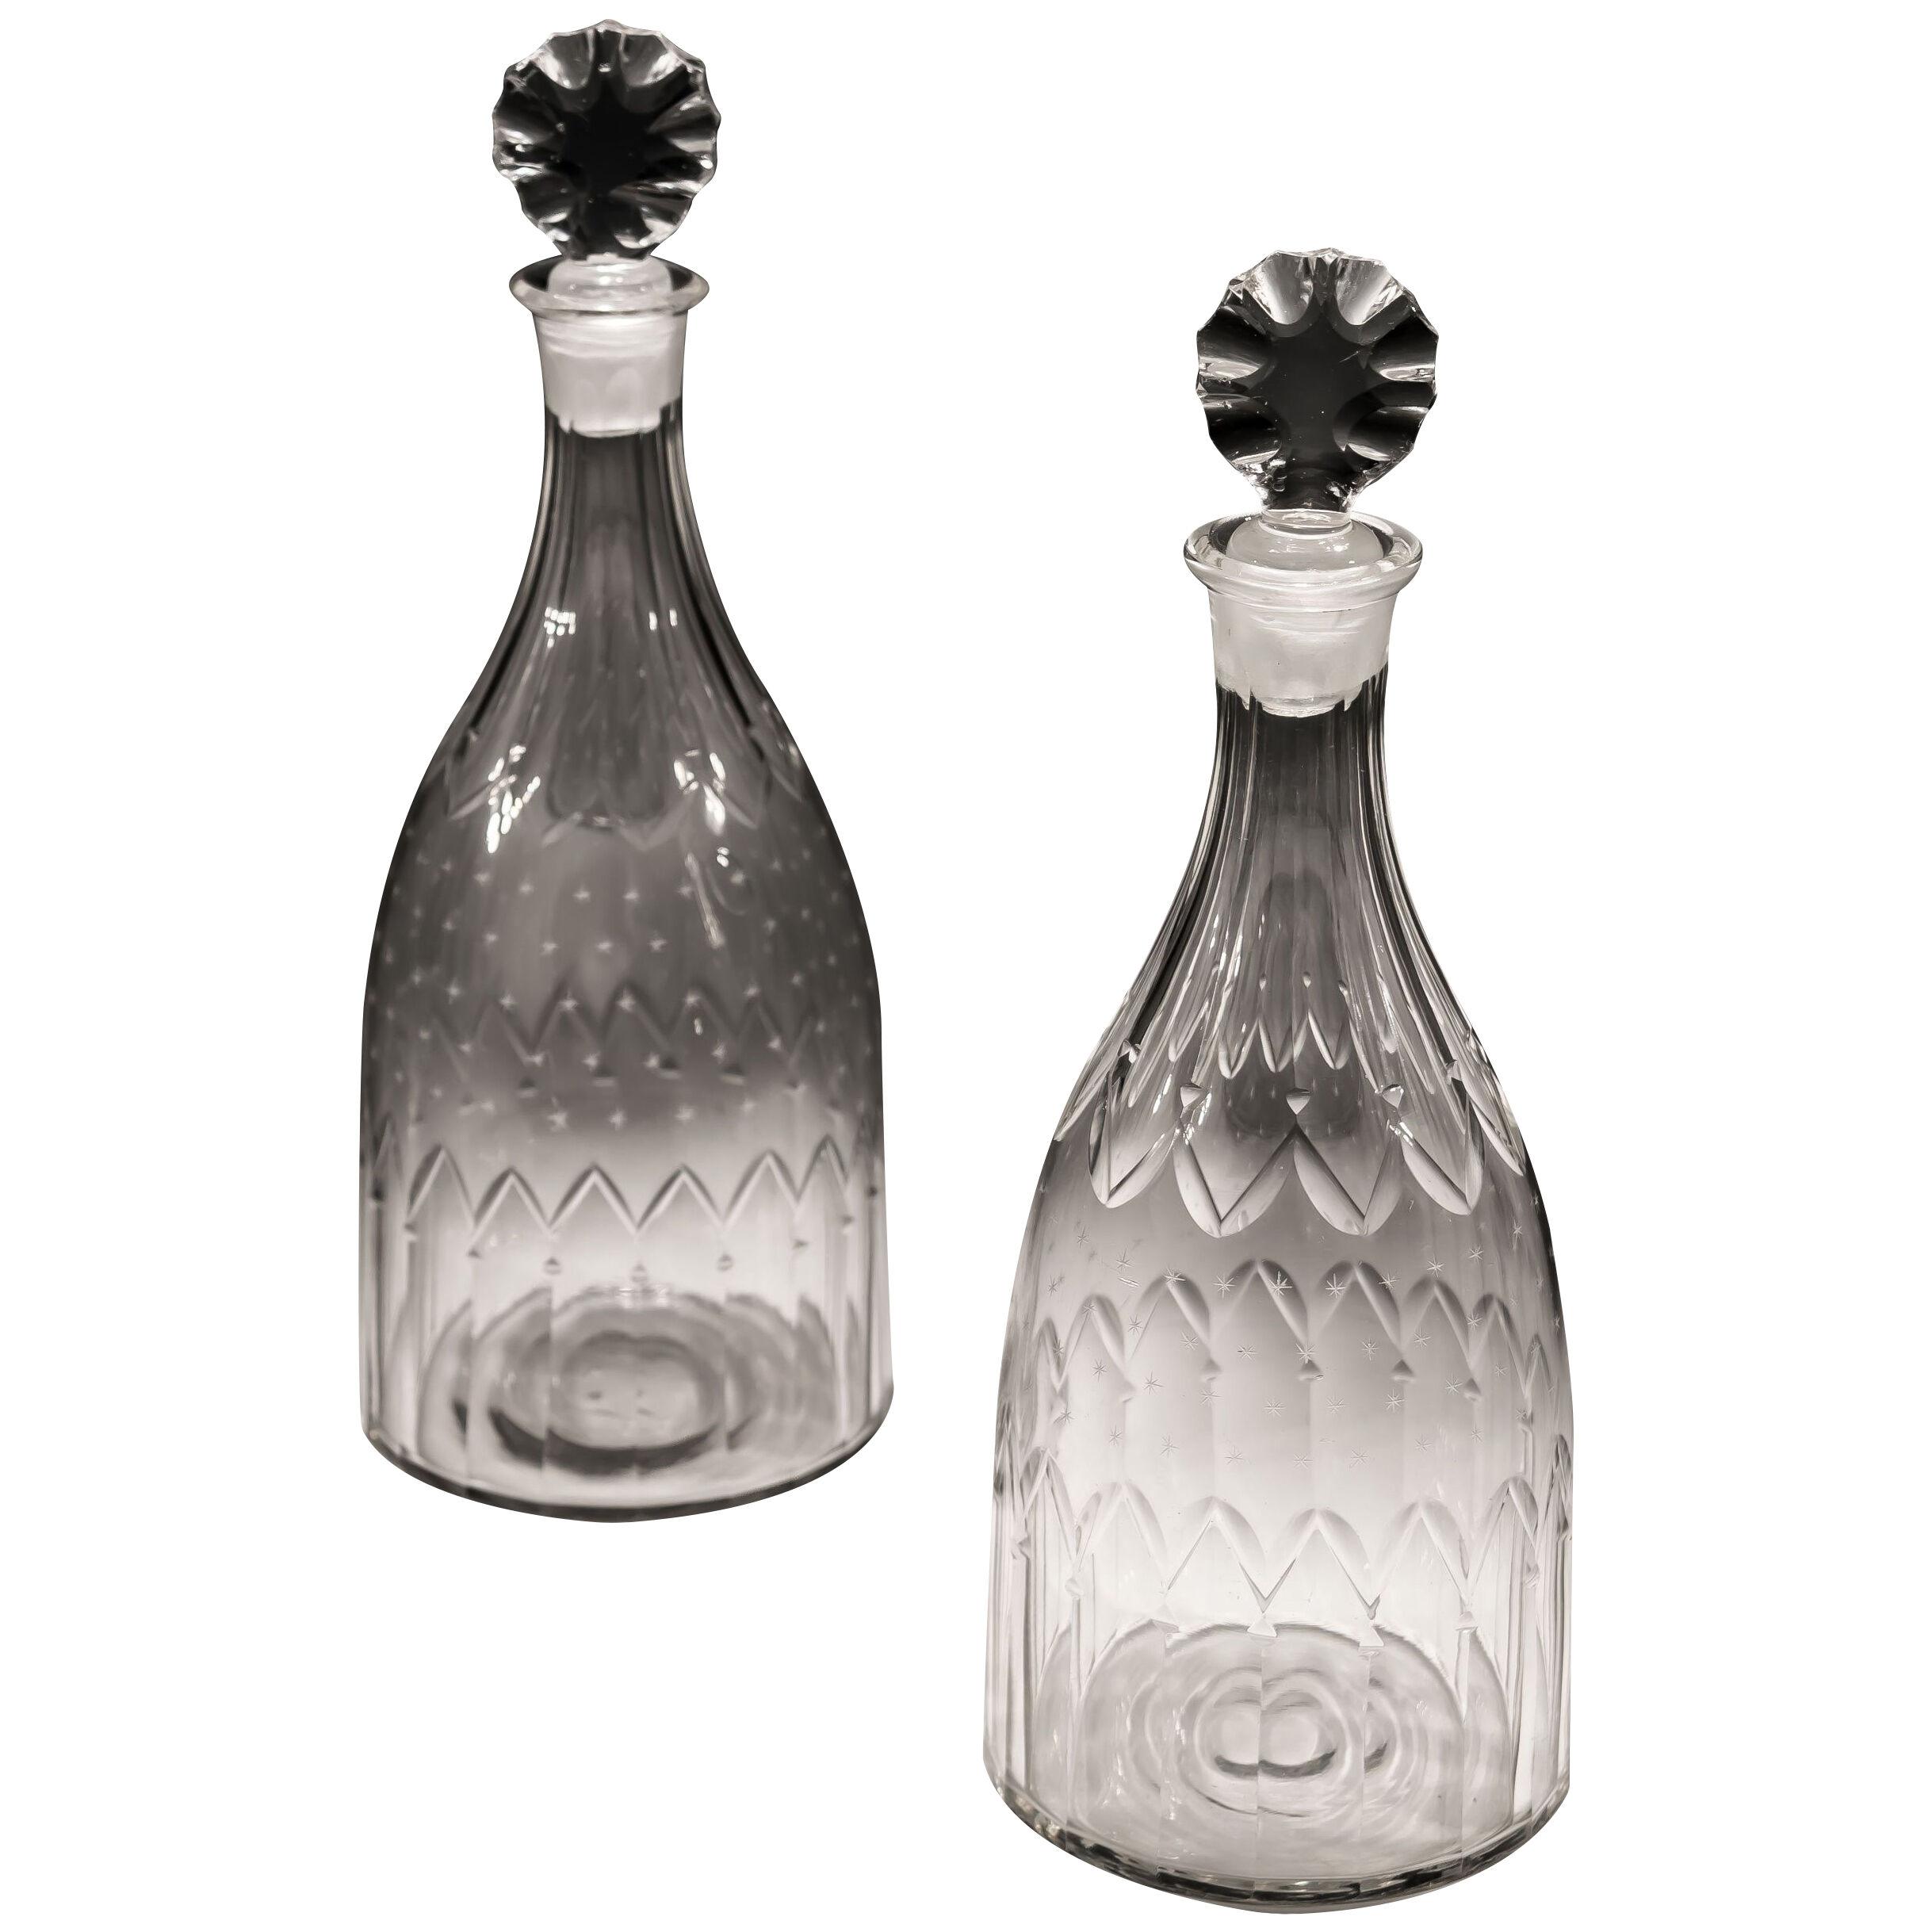 A Pair of Cut Glass 18th Century Tapered Decanters Finely Engraved with Stars	